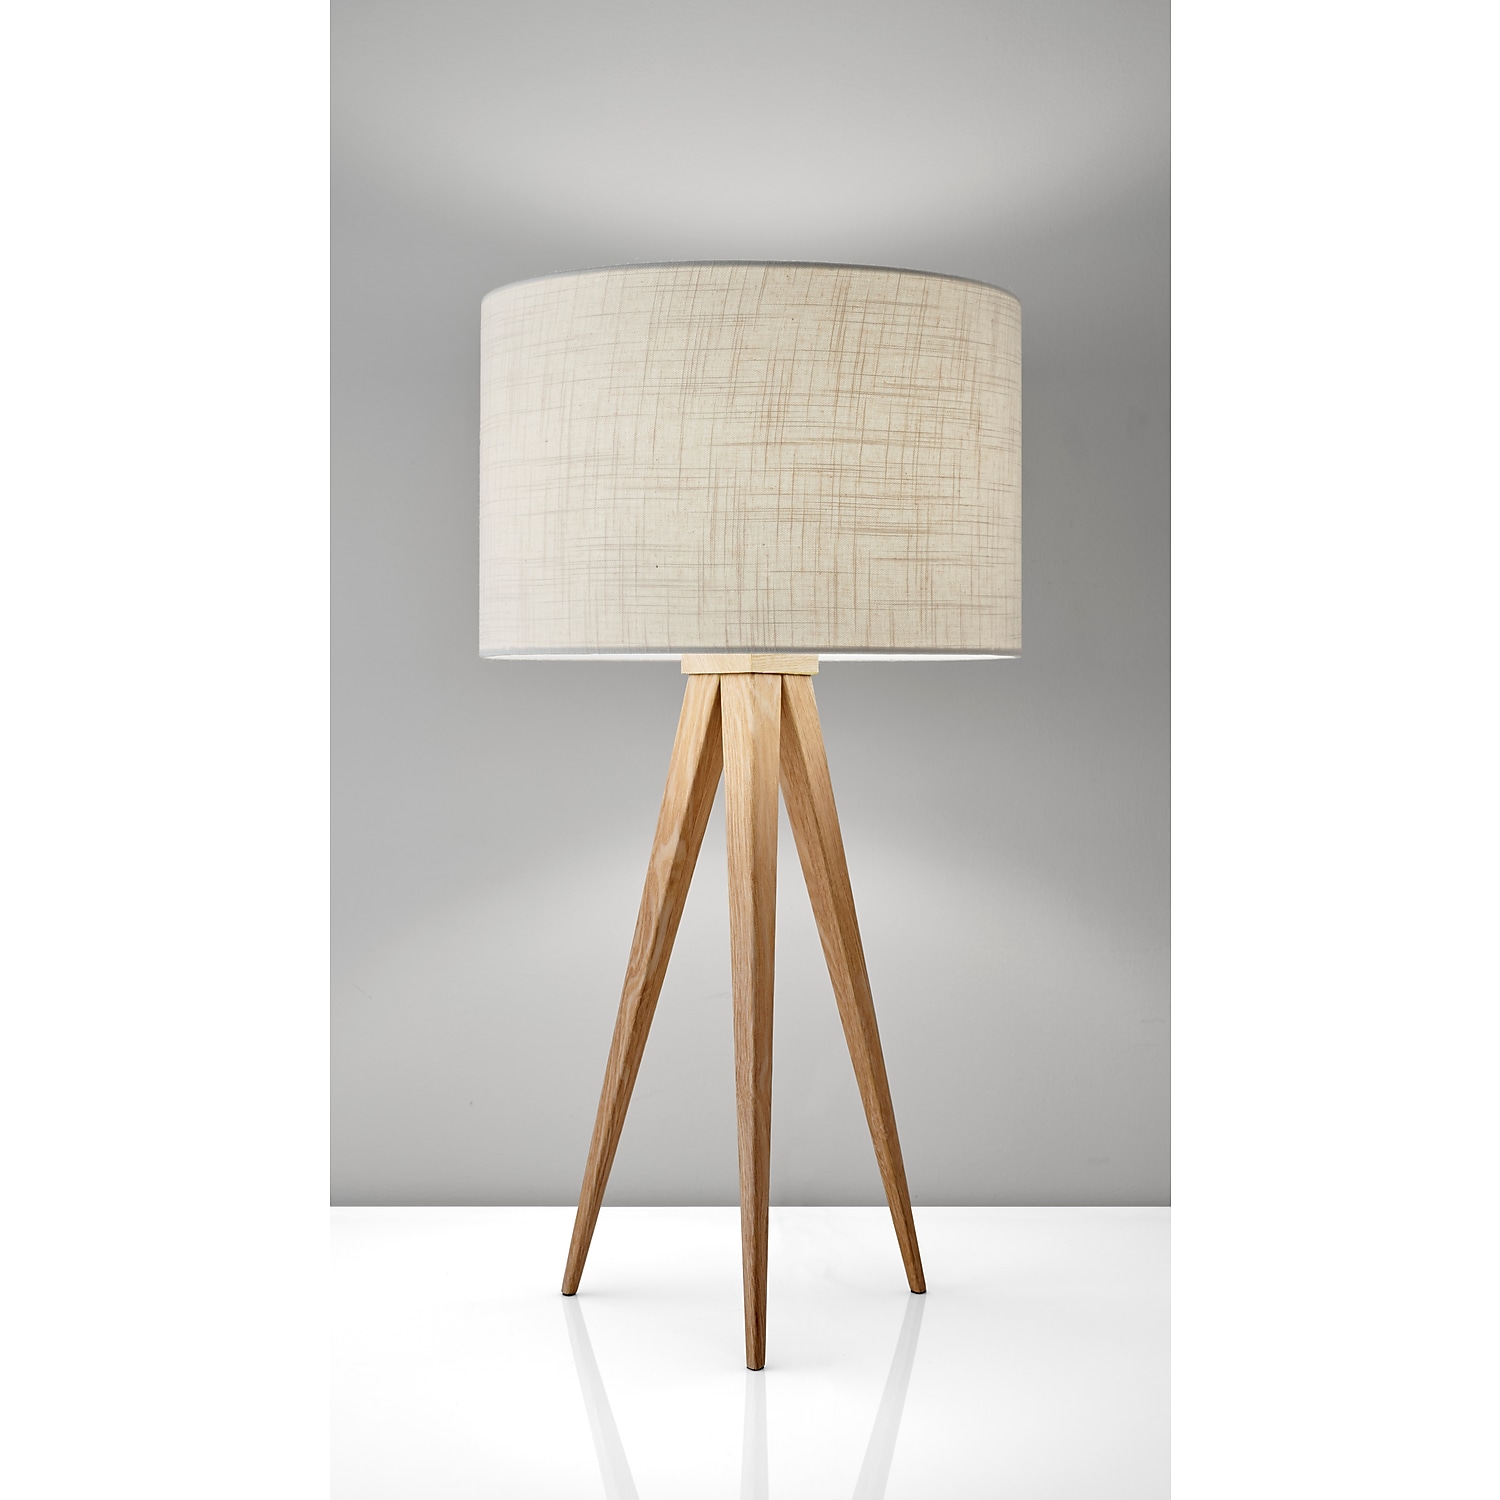 Adesso Home Director Metal Table Lamp in Natural - image 3 of 4